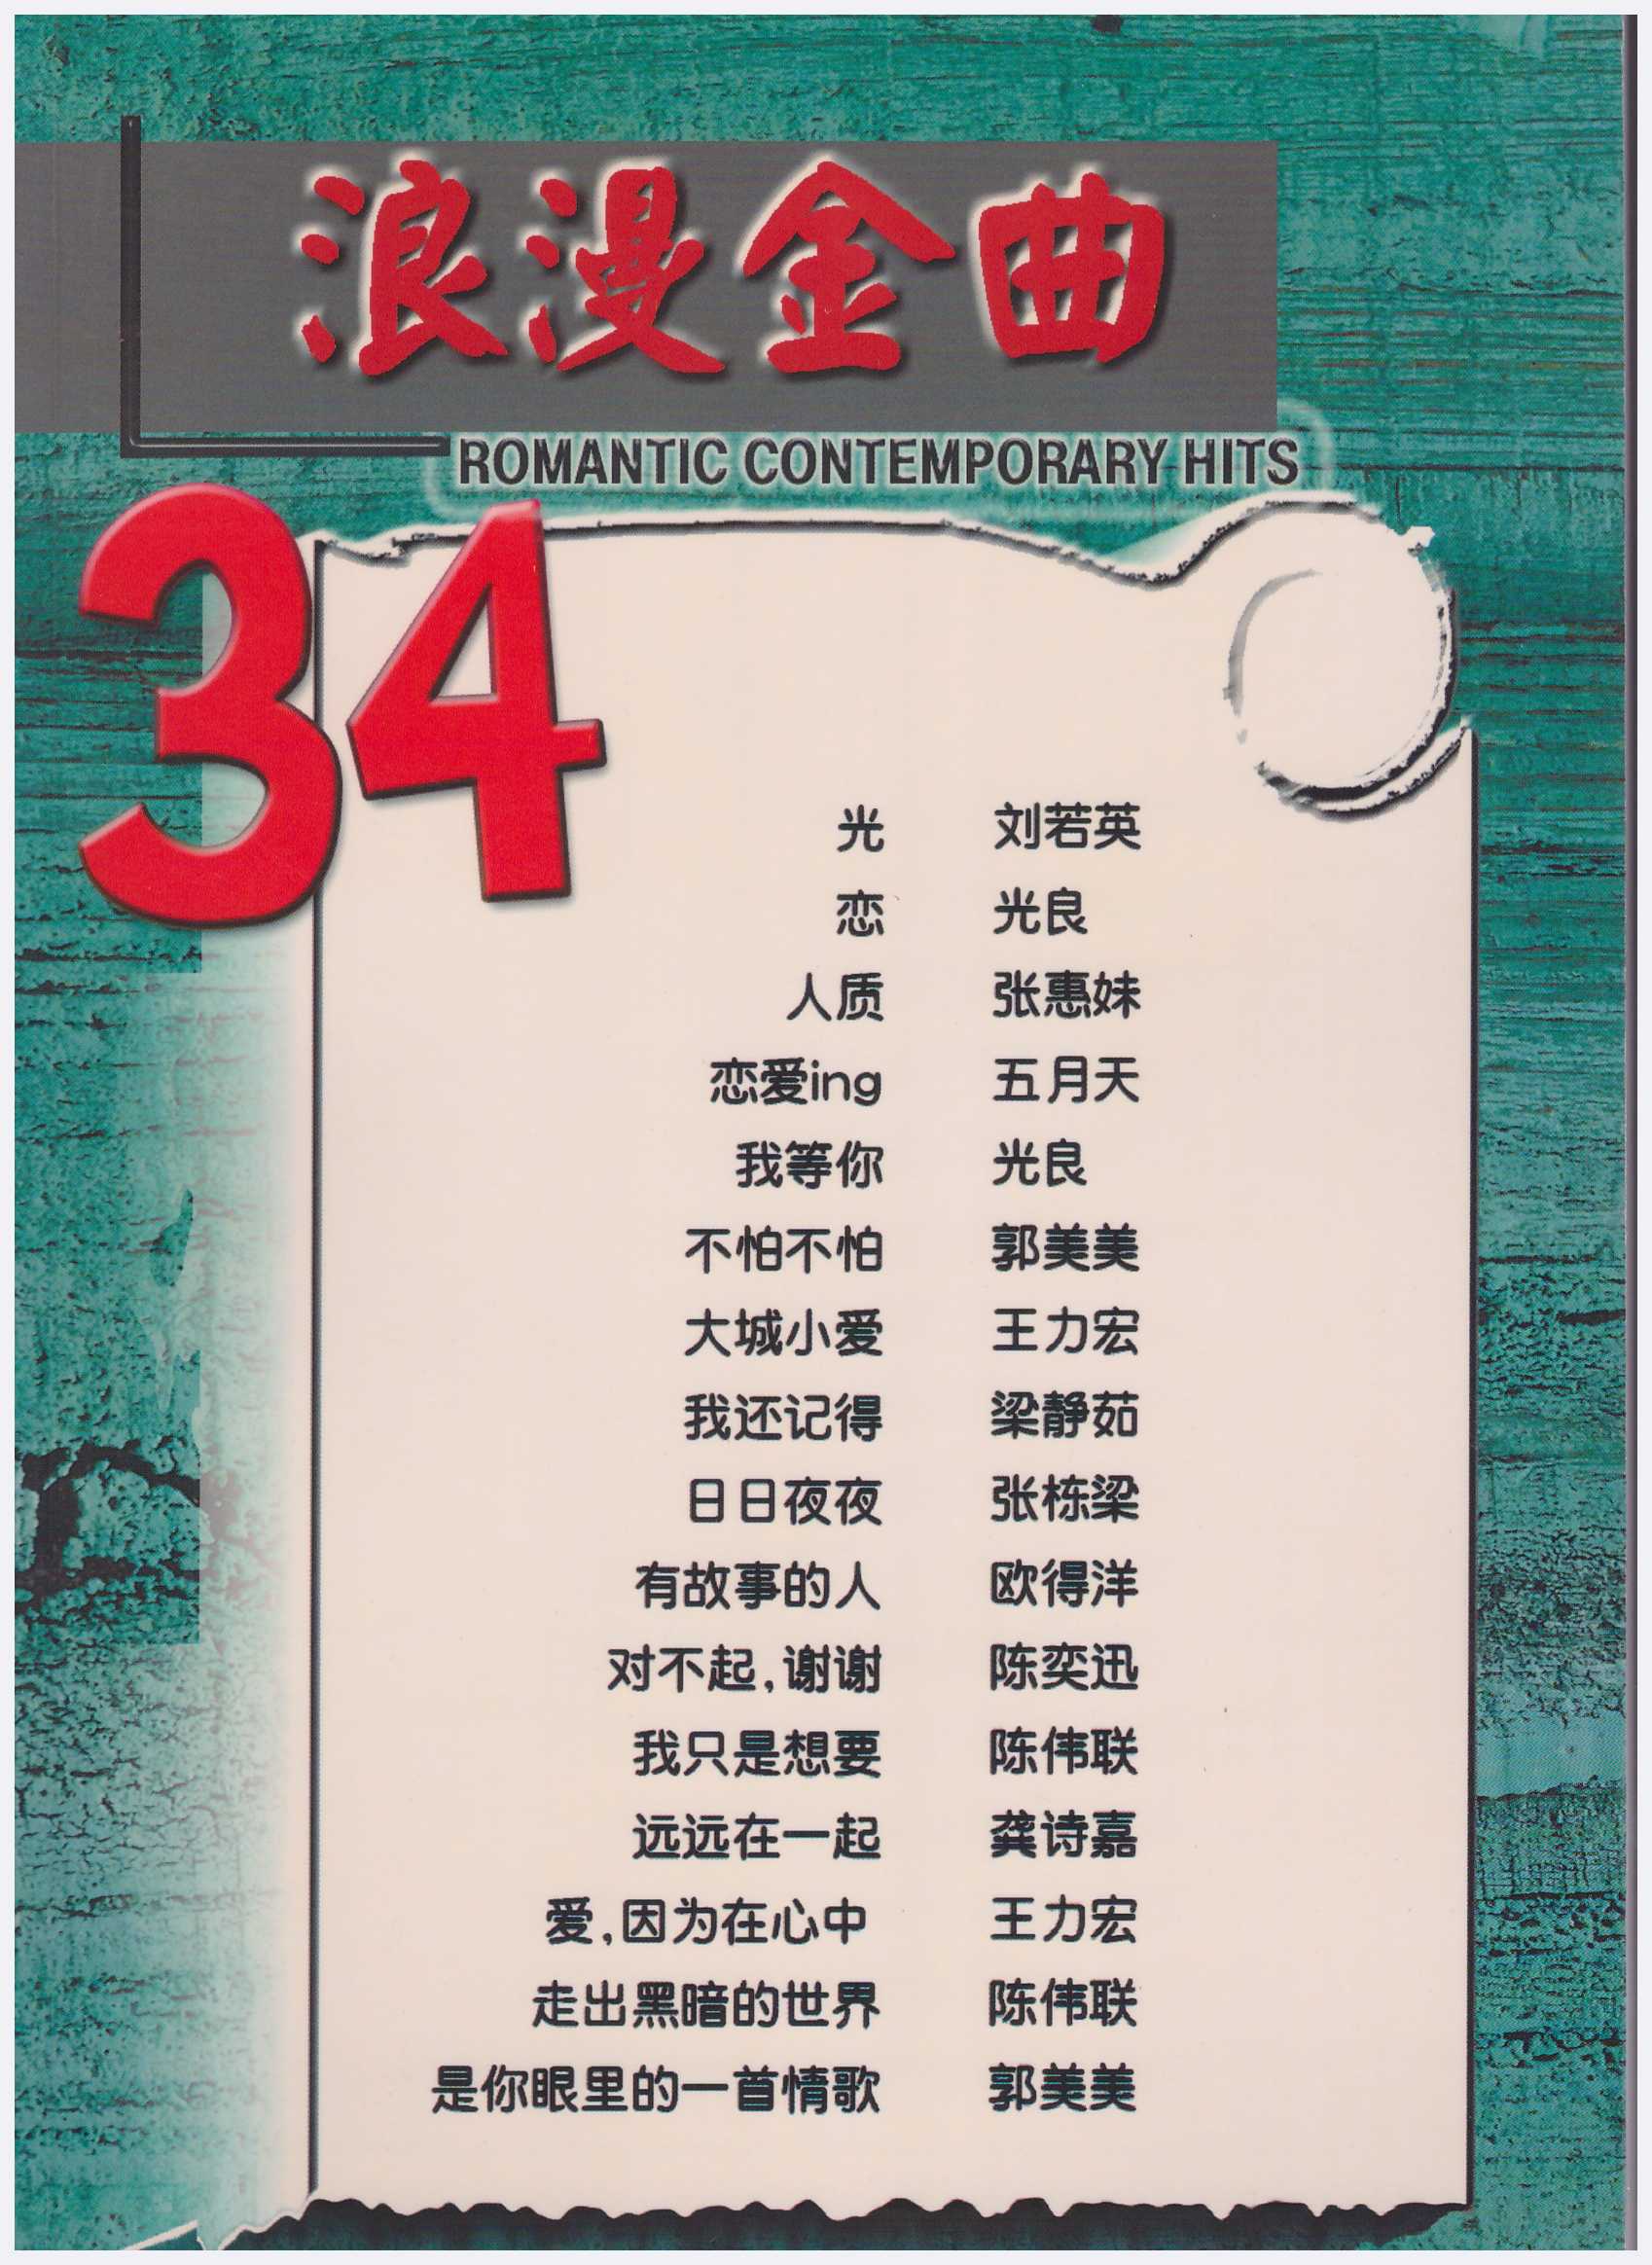 Romantic Contemporary Hits 34 (浪漫金曲) / Pop Song Book / Piano Book / Vocal Book / Guitar Book / Chinese Song Book